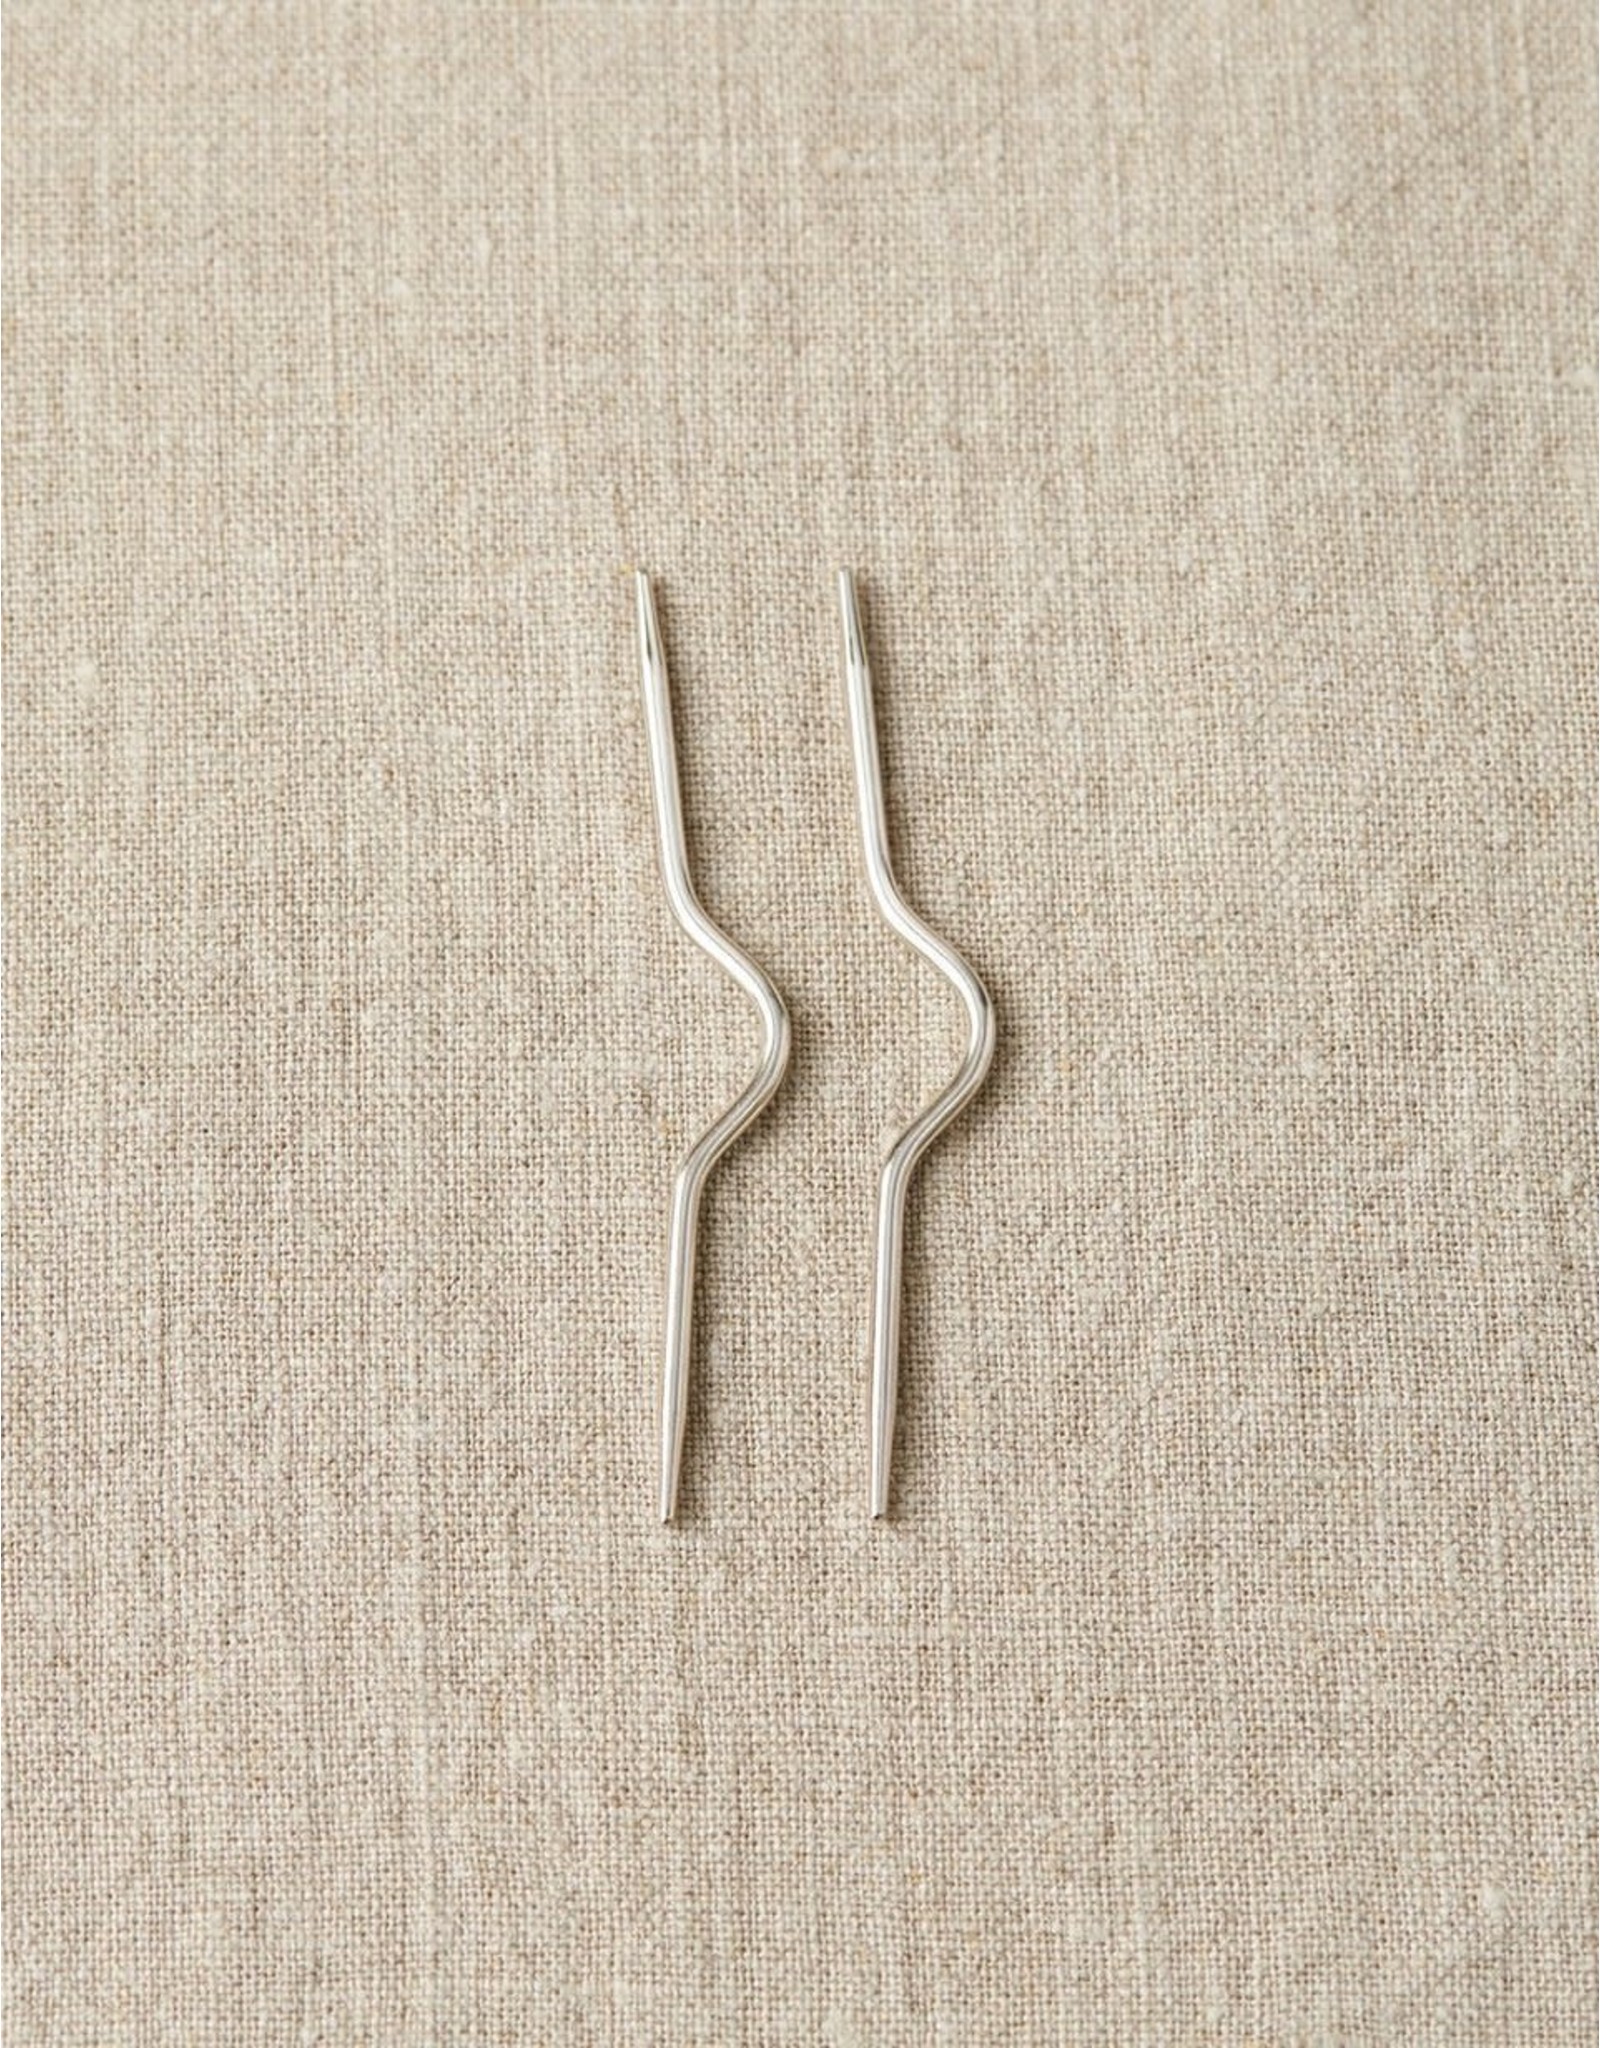 Curved Cable Needle by Cocoknits